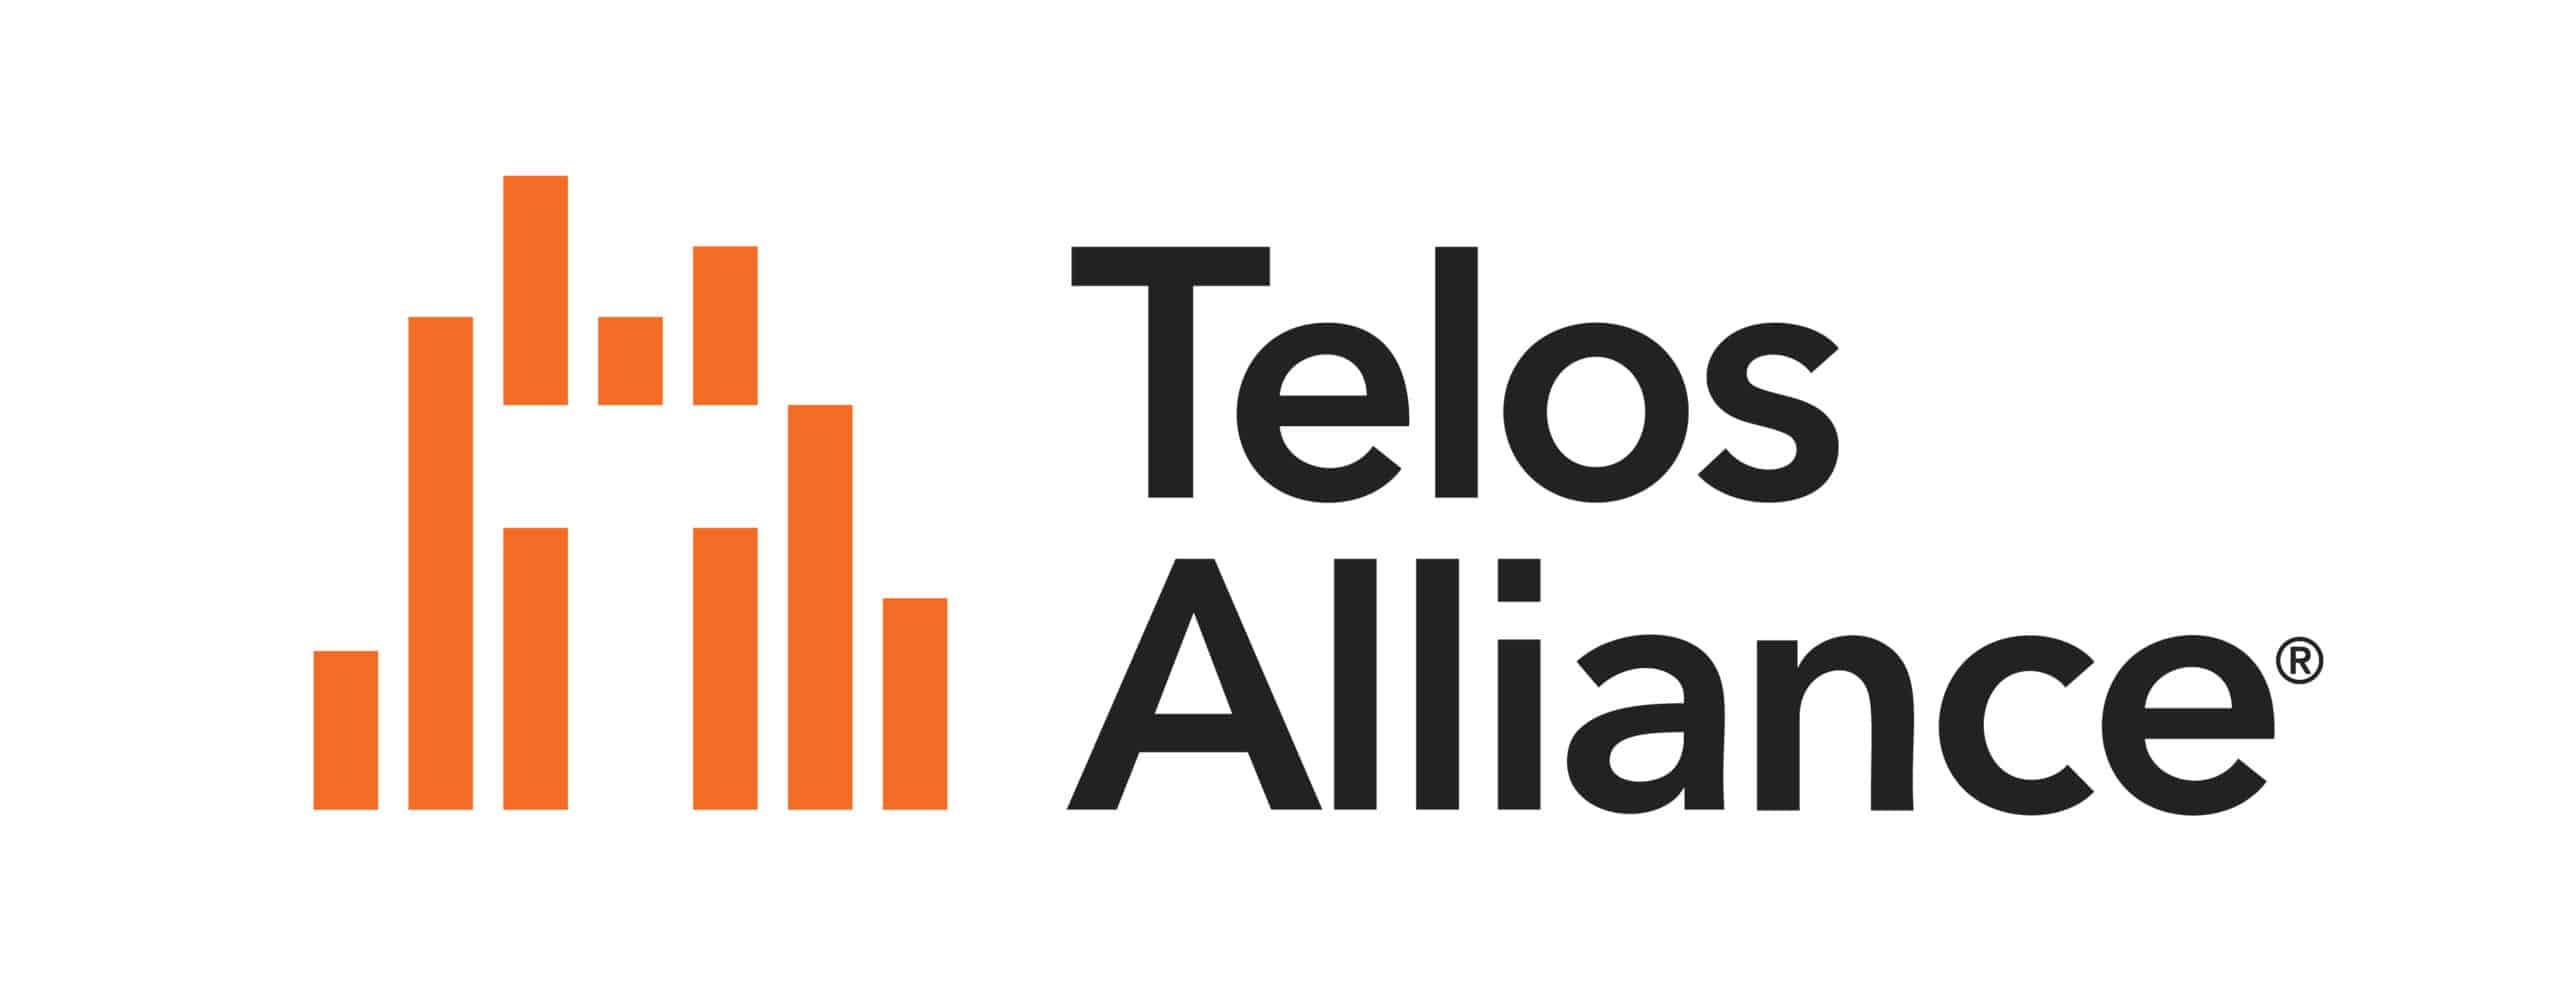 Telos Alliance solutions offers backward compatibility, addresses the concerns of aging ATSC 1.0 infrastructures while future-proofing the way forward for ATSC 3.0 today